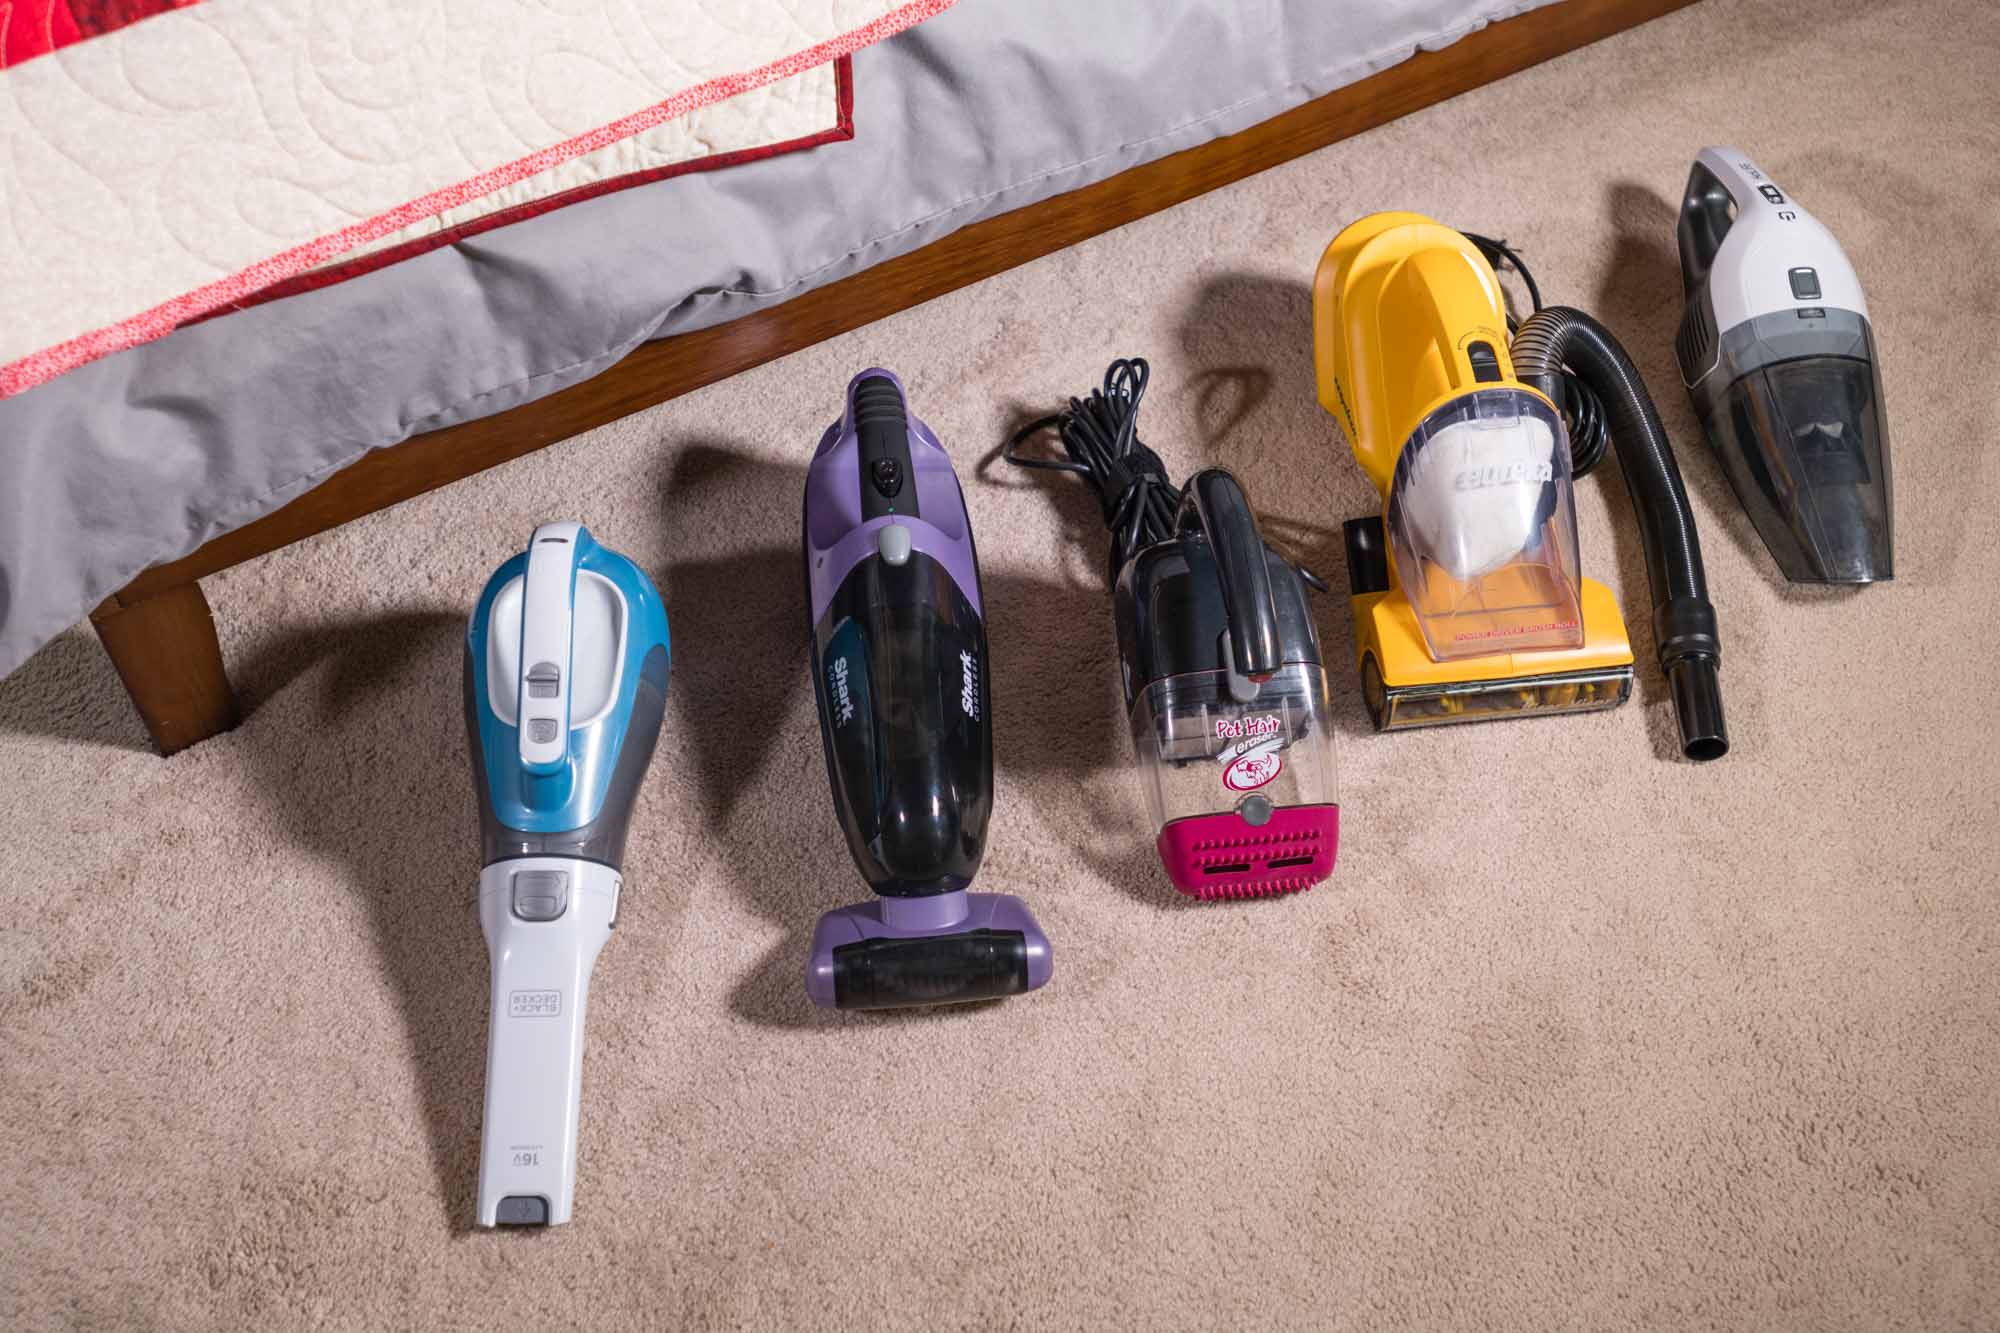 Lightweight Wall Mount Charger Hand Held Vac Holife Handheld Vacuum Cleaner Cordless